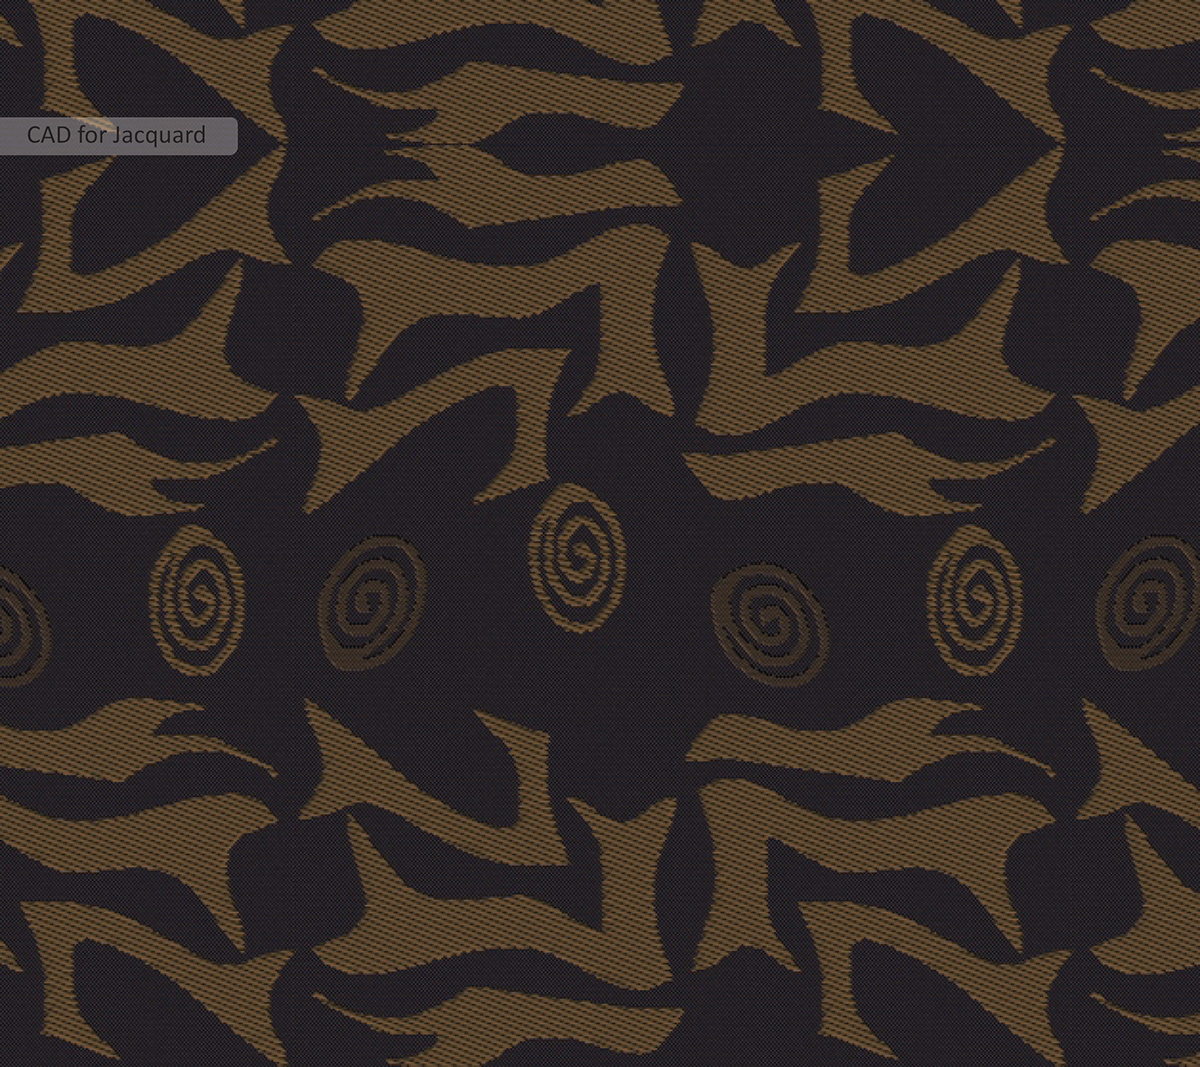 jacquard CAD for Jacquard ned graphics simulation upholstery fabric